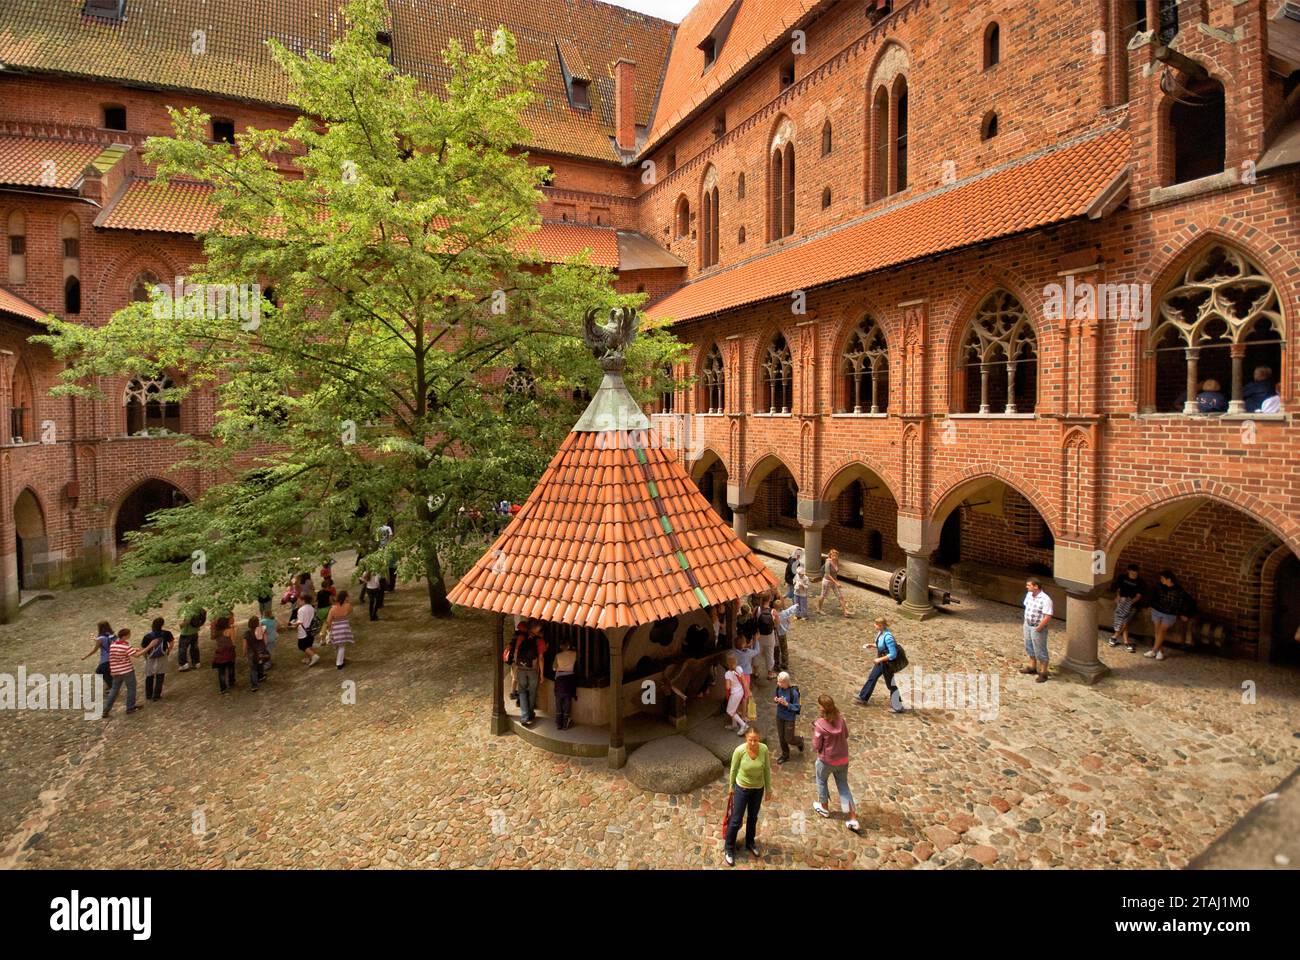 Courtyard with water well at Upper Castle section of Medieval Teutonic Castle at Malbork, Pomorskie, Poland Stock Photo